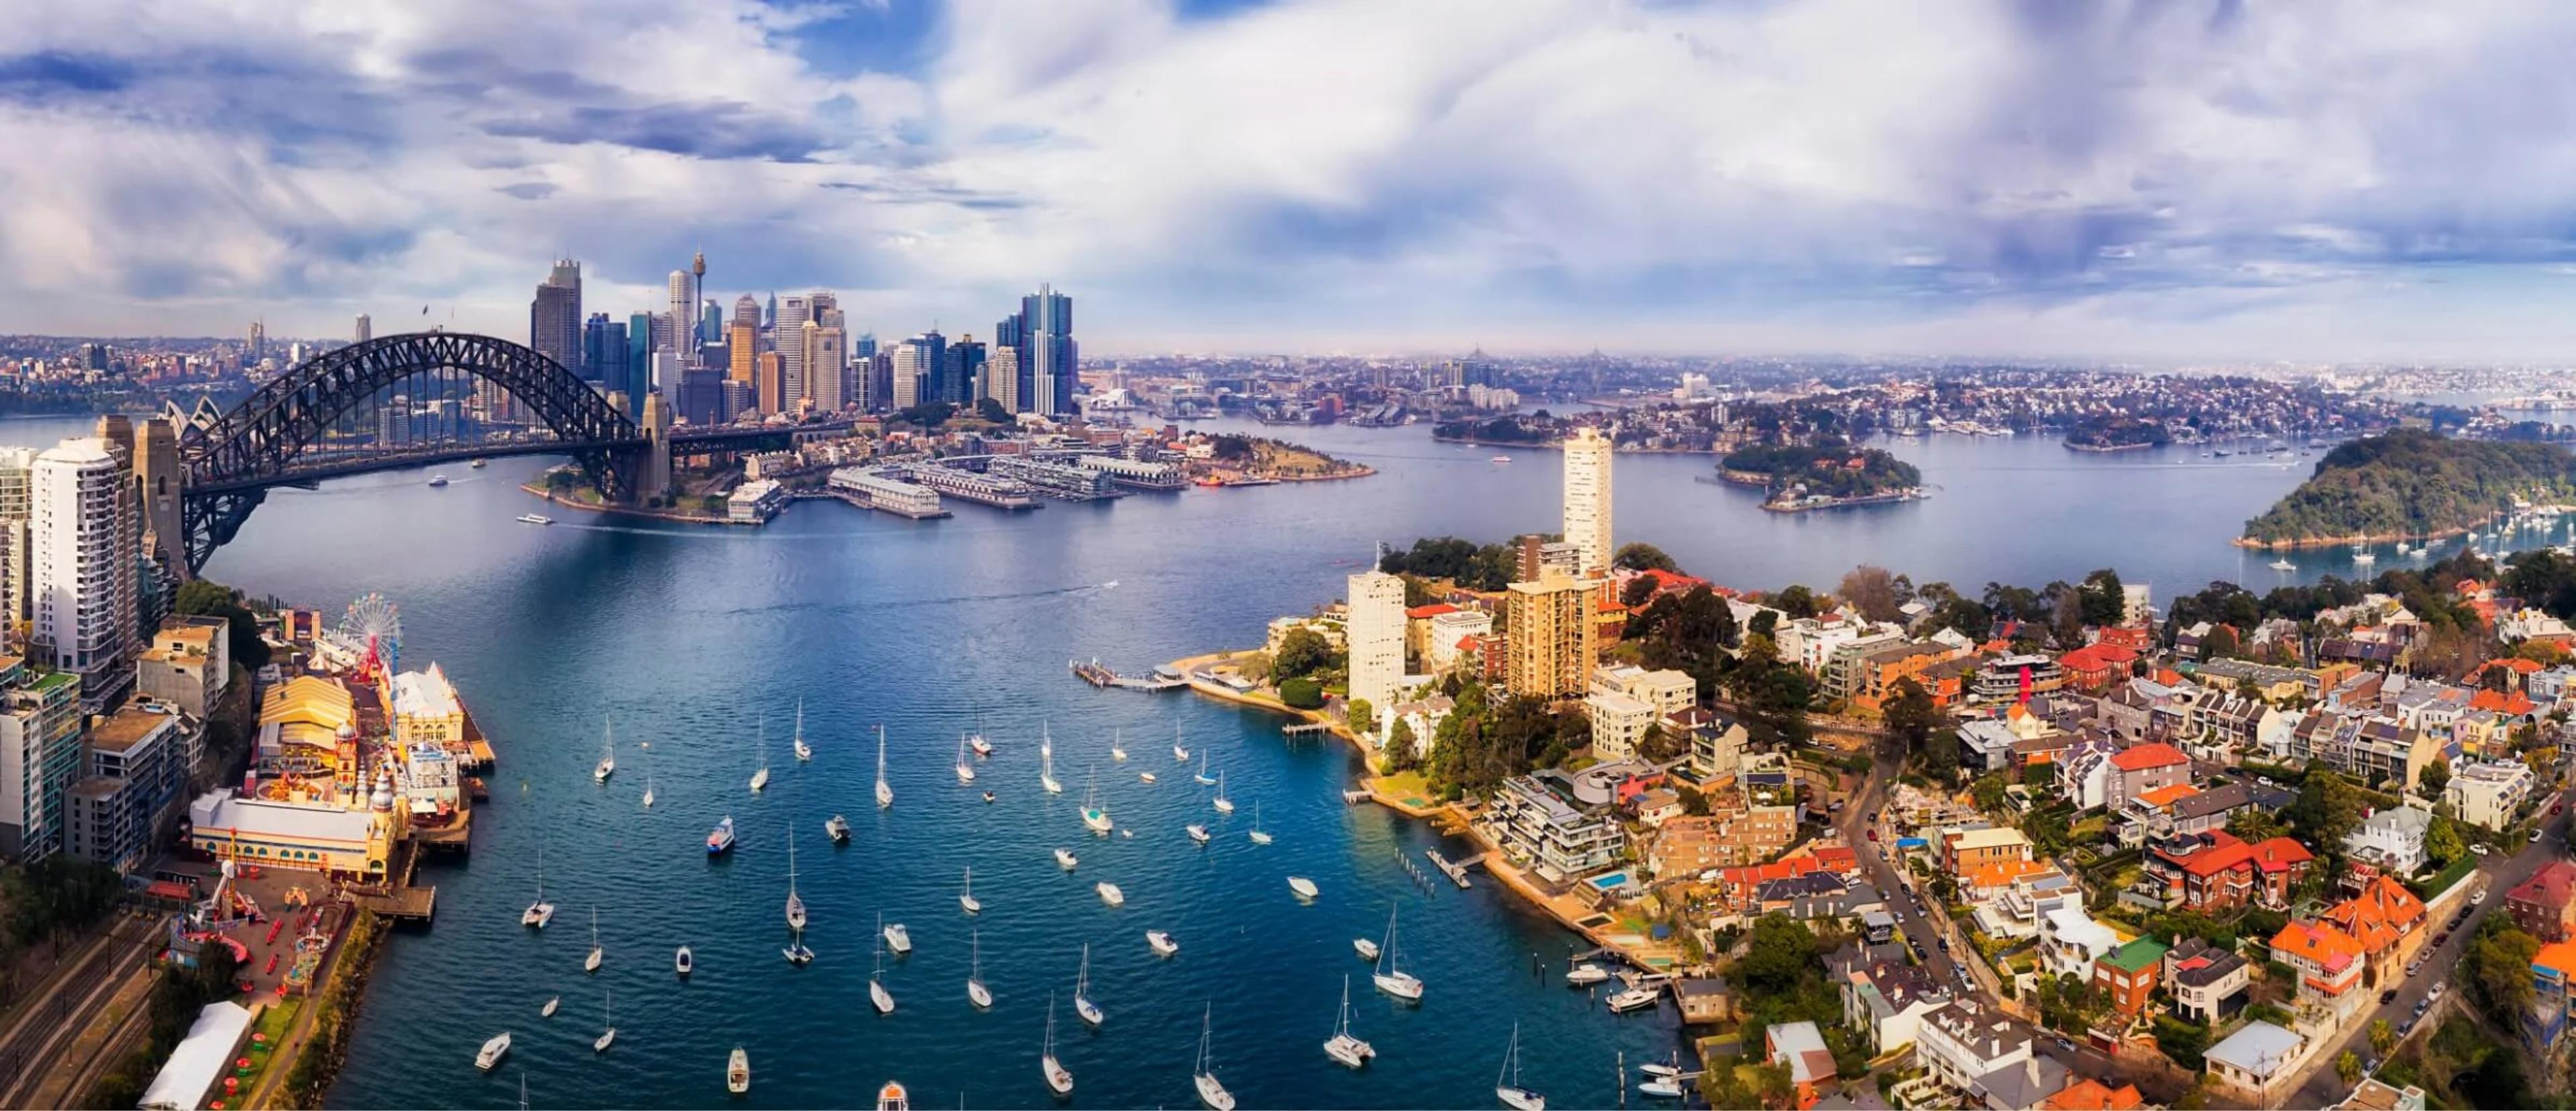 Selling houses in Sydney made easy with AgentSpot